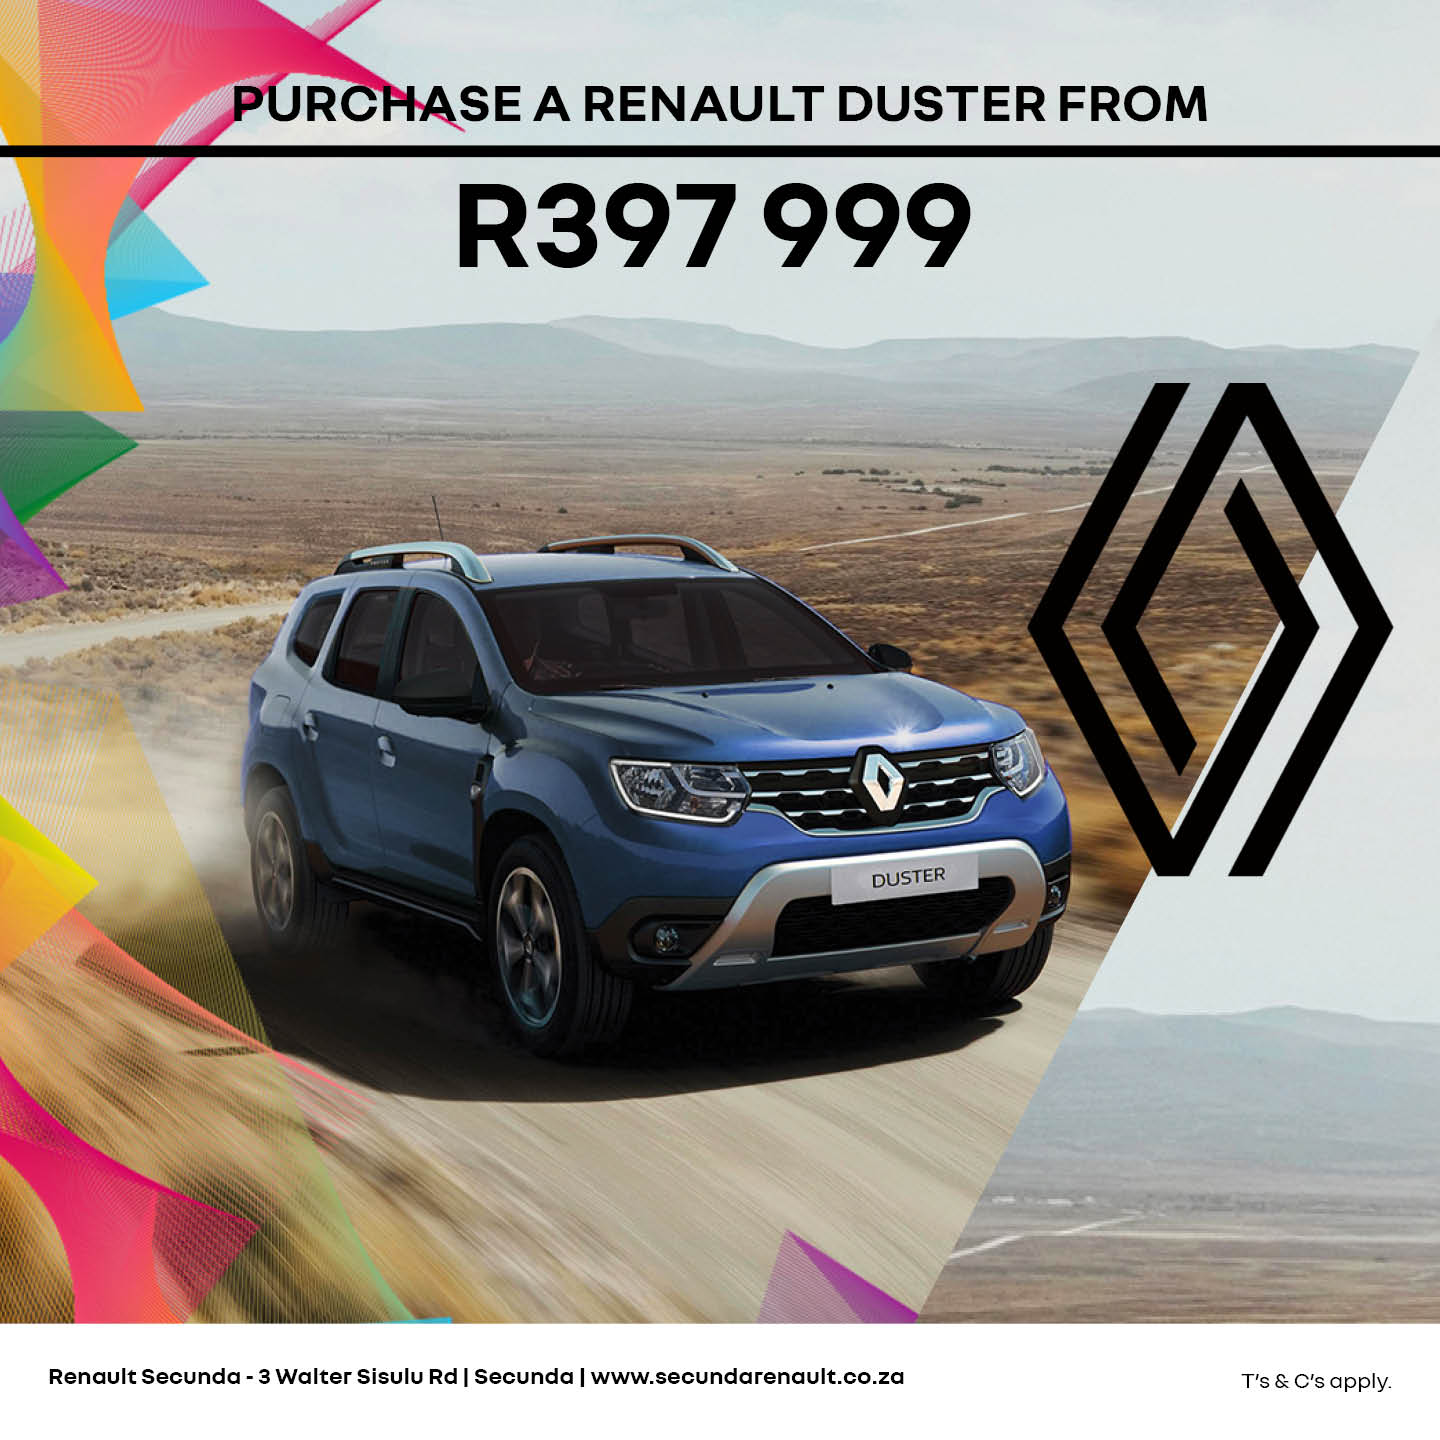 Dust through the road with the Renault Duster! image from Eastvaal Motors